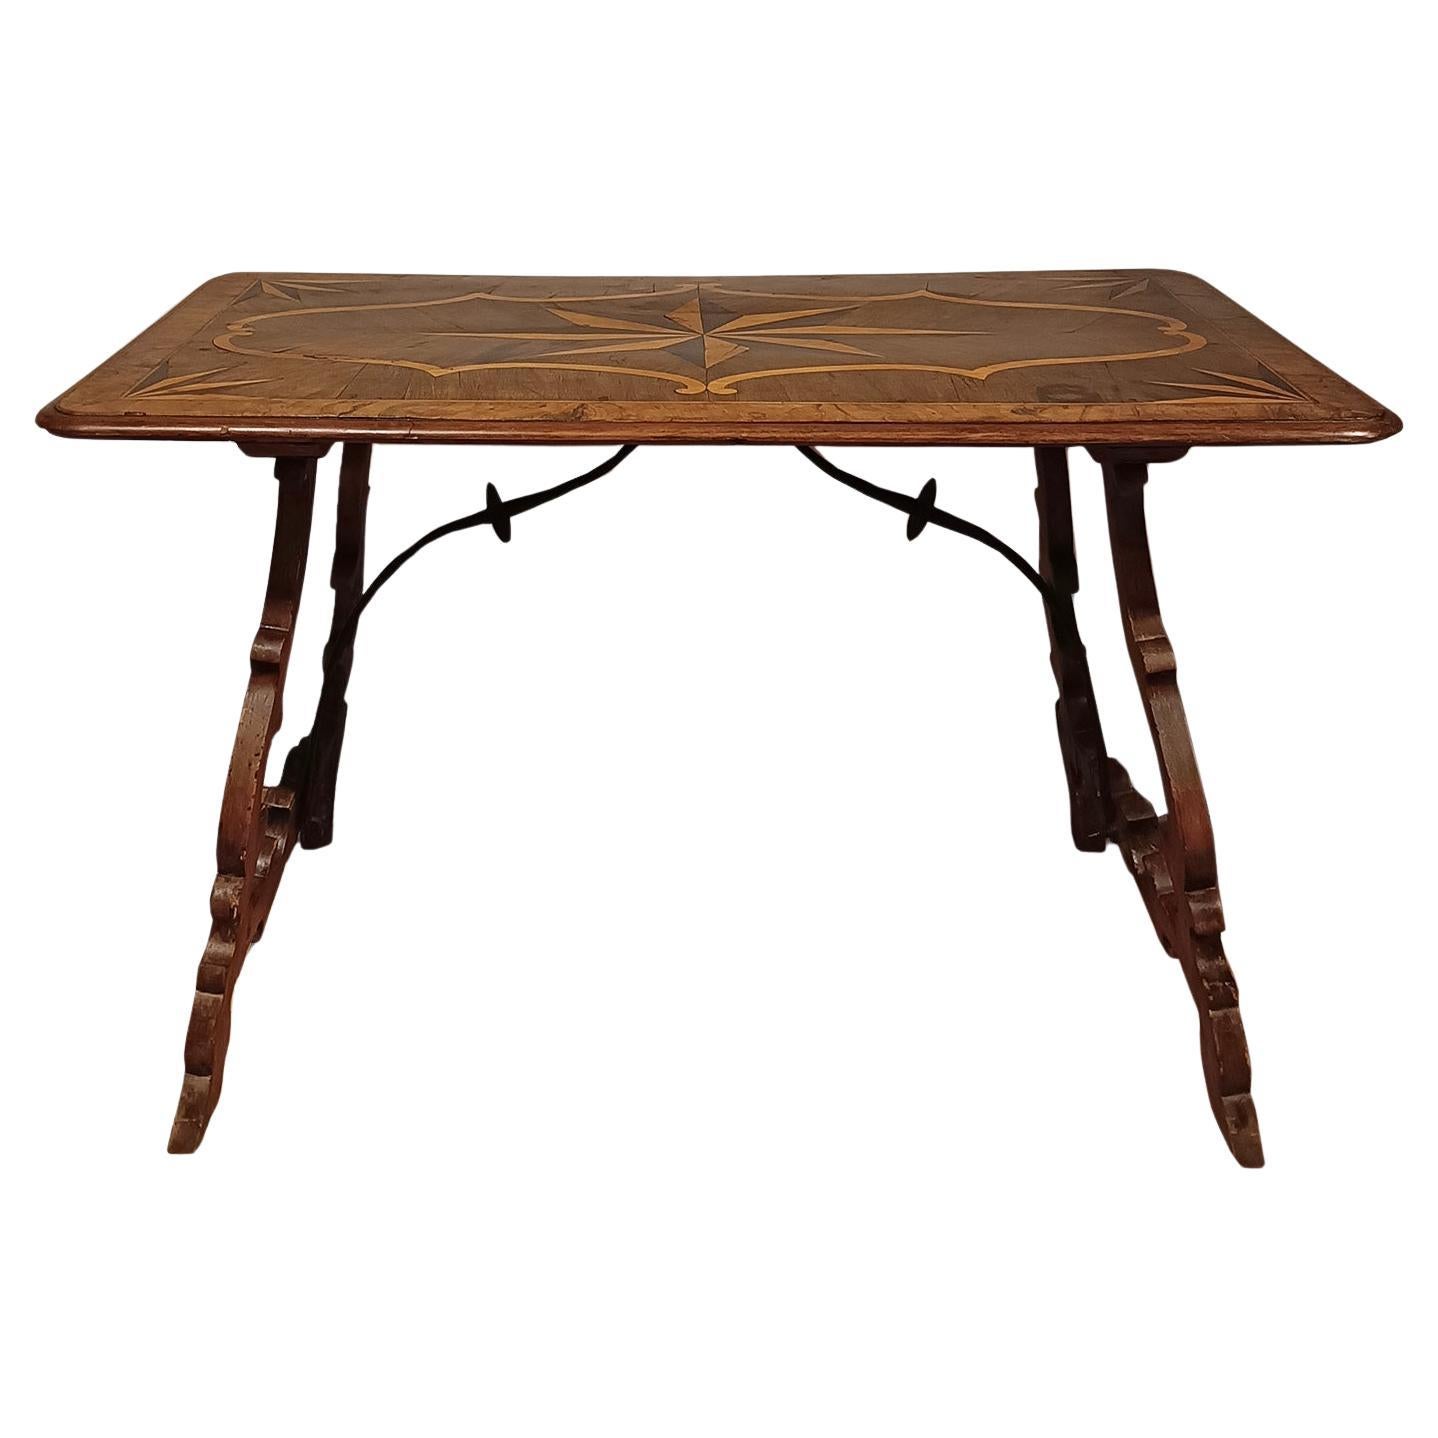 EARLY 18th CENTURY INLAID TABLE WITH LYRE LEGS For Sale